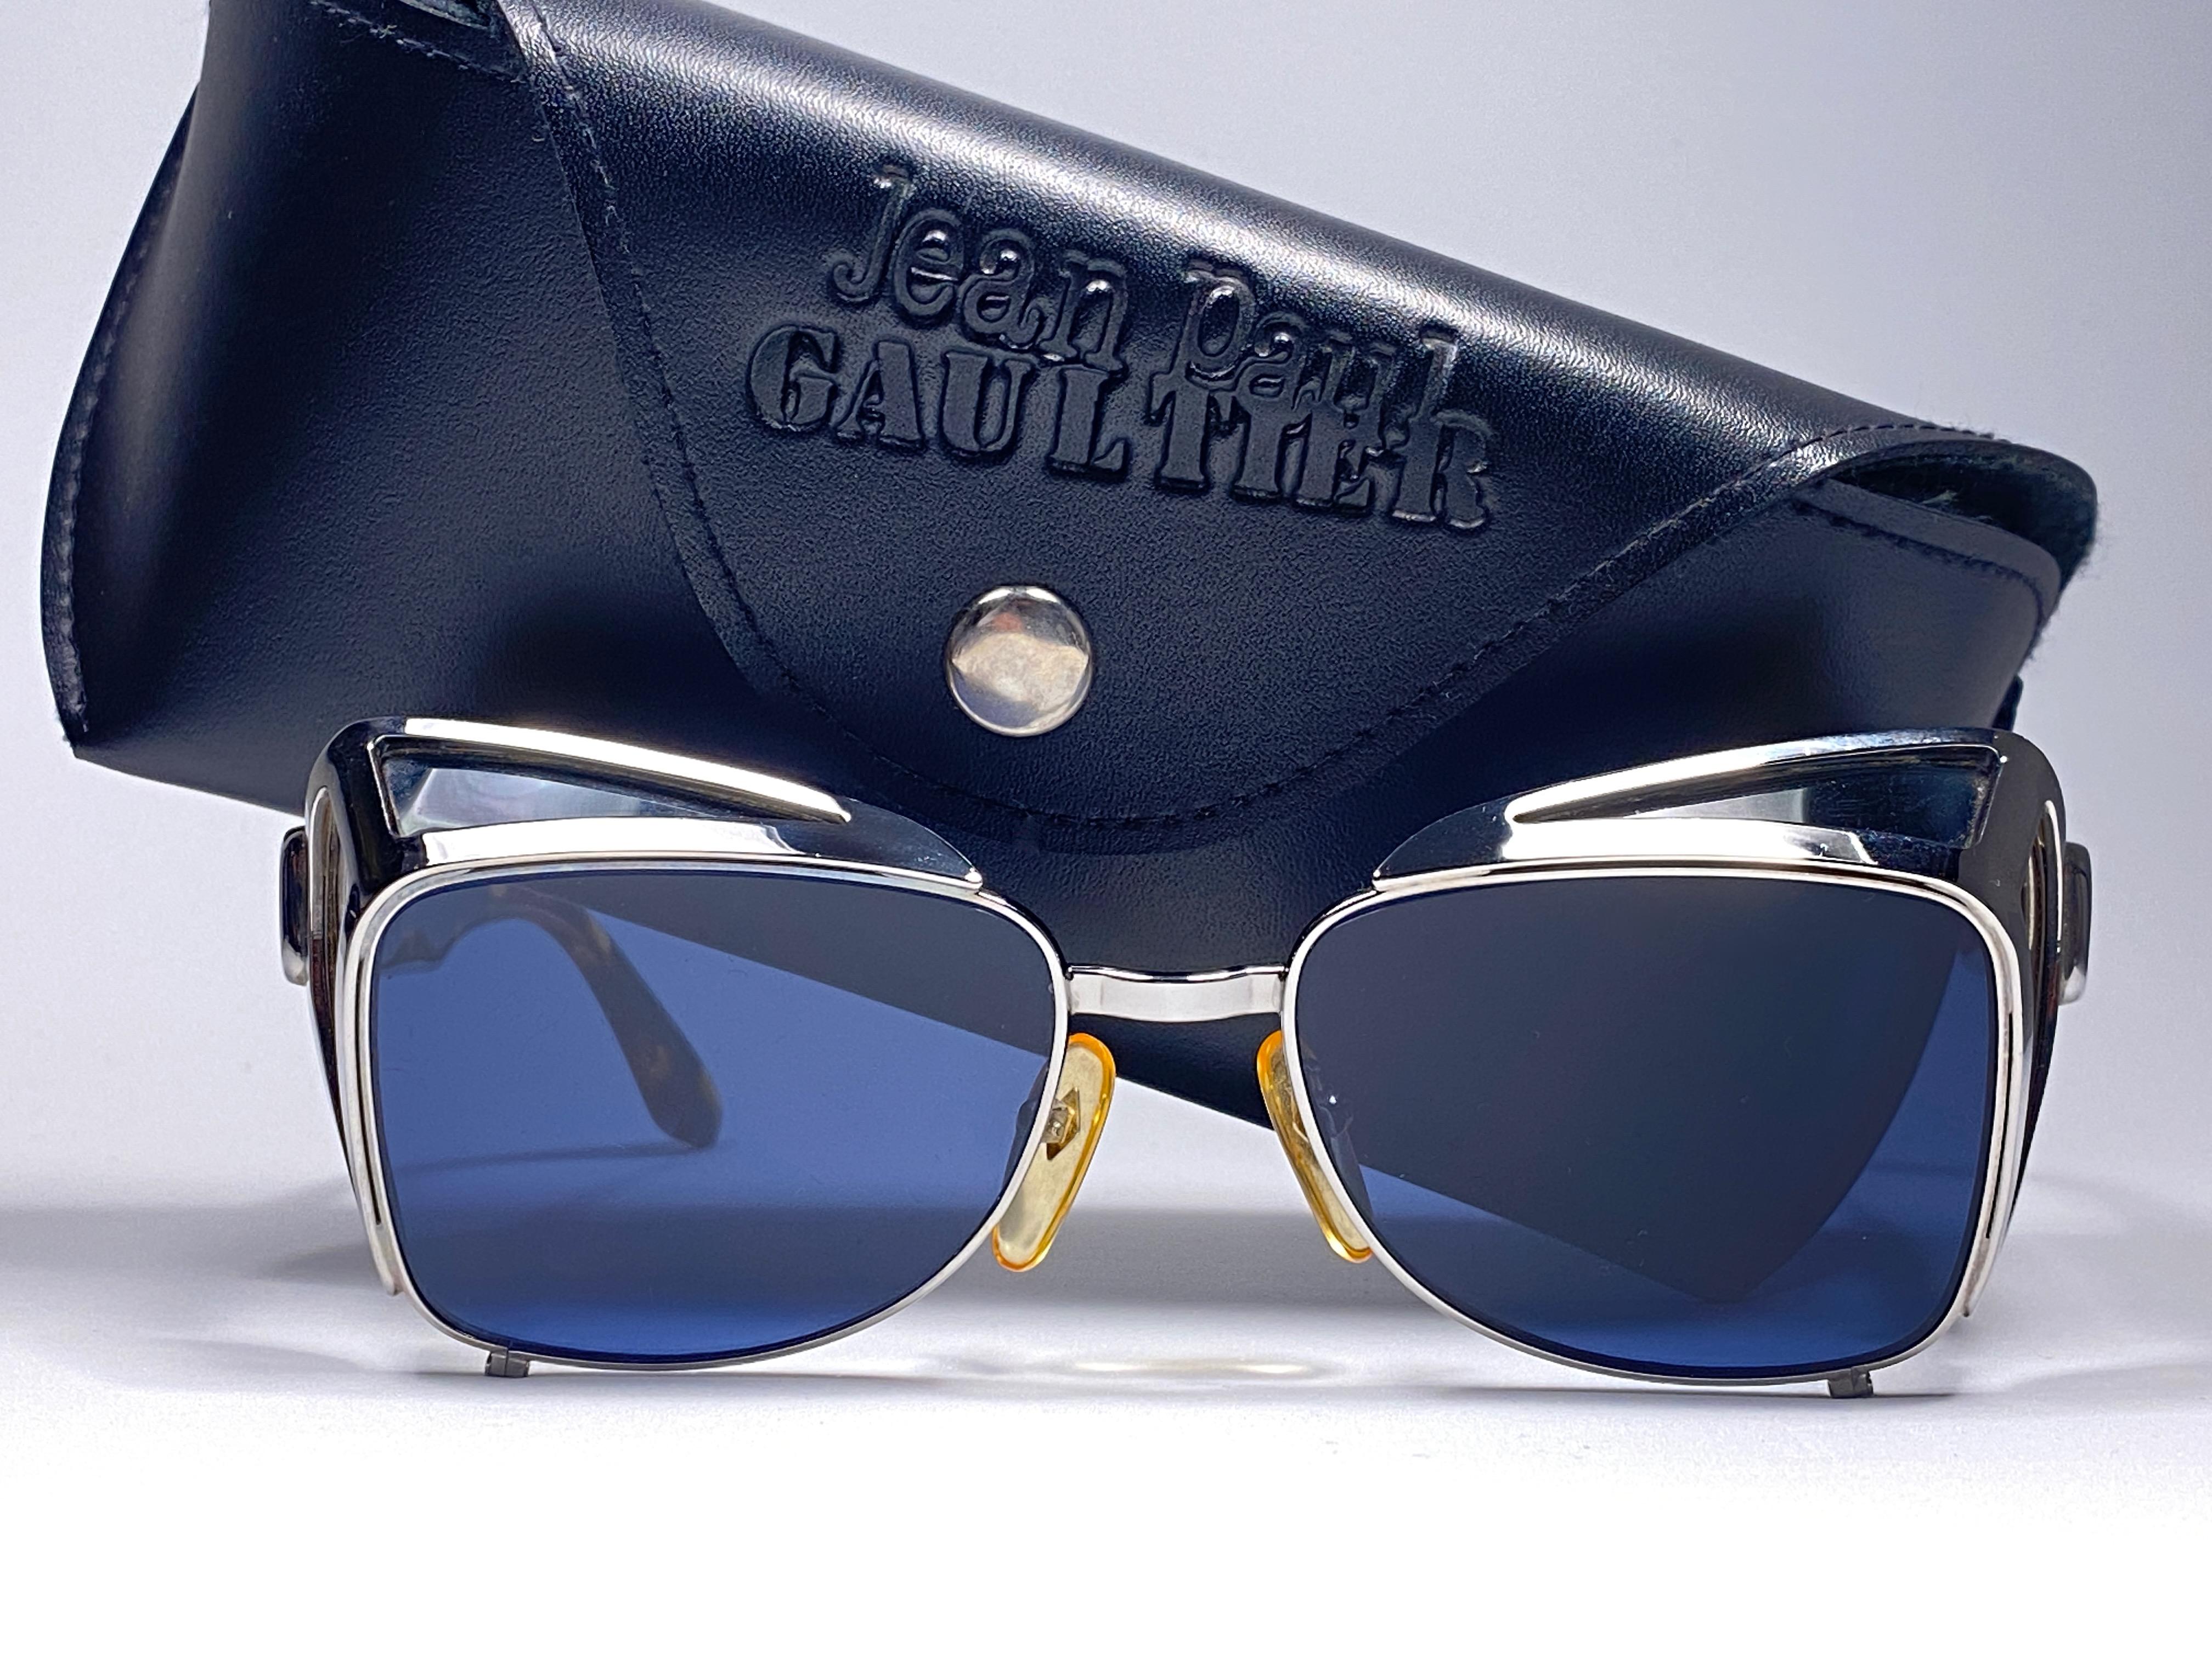 Collectors Item!!
Iconic Jean Paul Gaultier 56 8272 Black marbled Silver Matte temples frame. 
Dark blue lenses that complete a ready to wear JPG look.
The very same model worn by Vanilla Ice in 1990's.
Amazing design with strong yet intricate